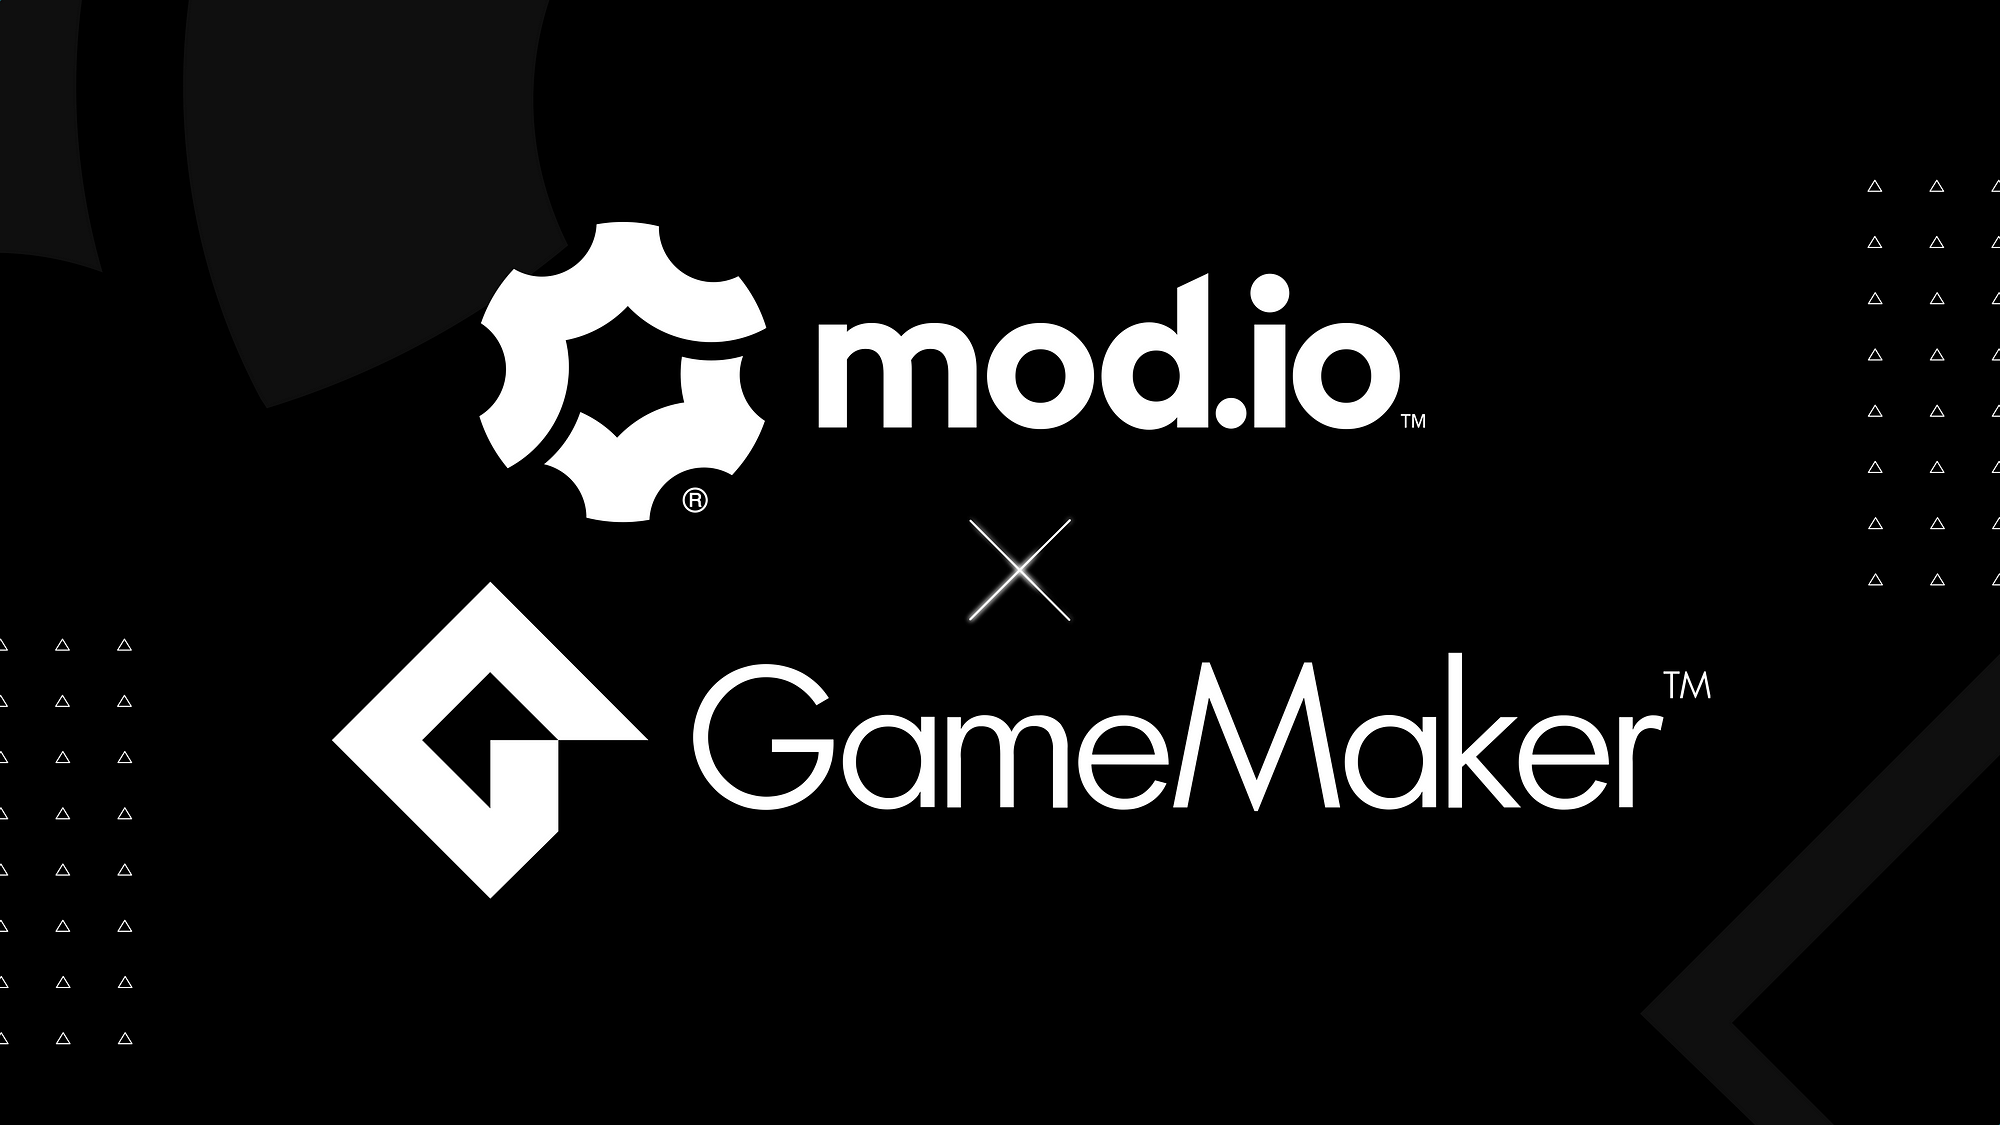 Indies can now make games using GameMaker and release them on